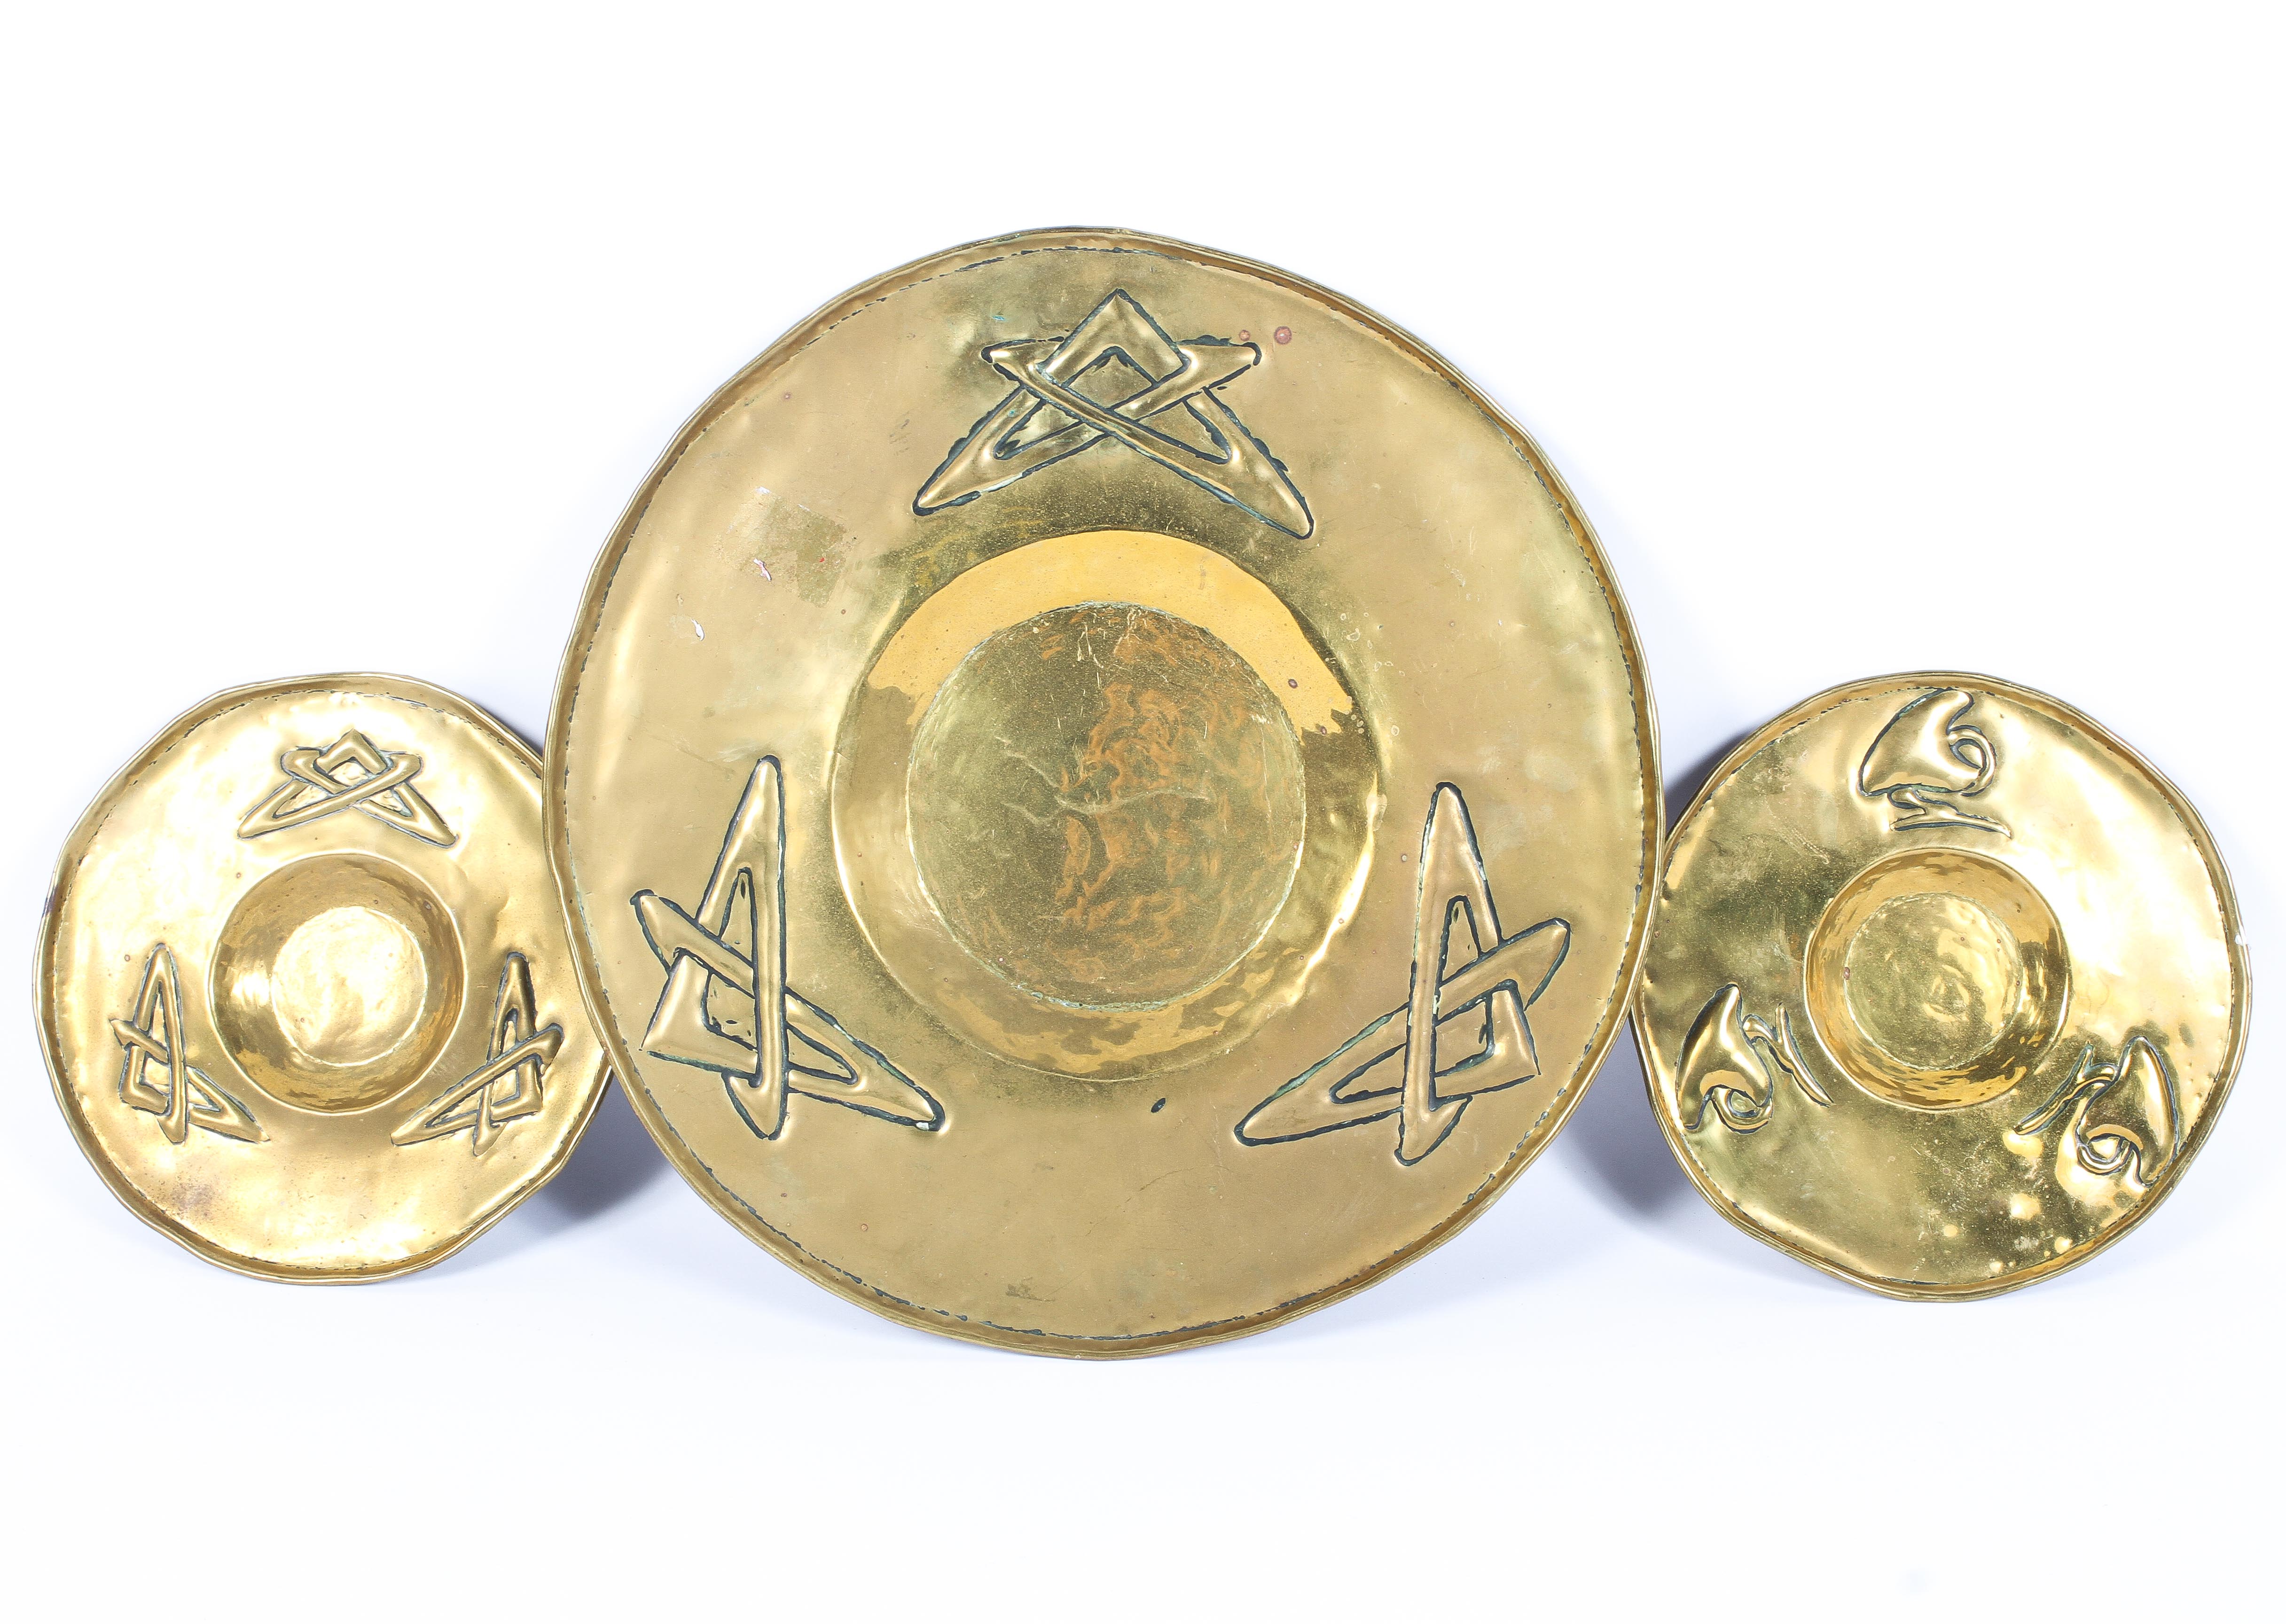 Three brass Arts and Crafts style dishes, early 20th century, two small and one large,